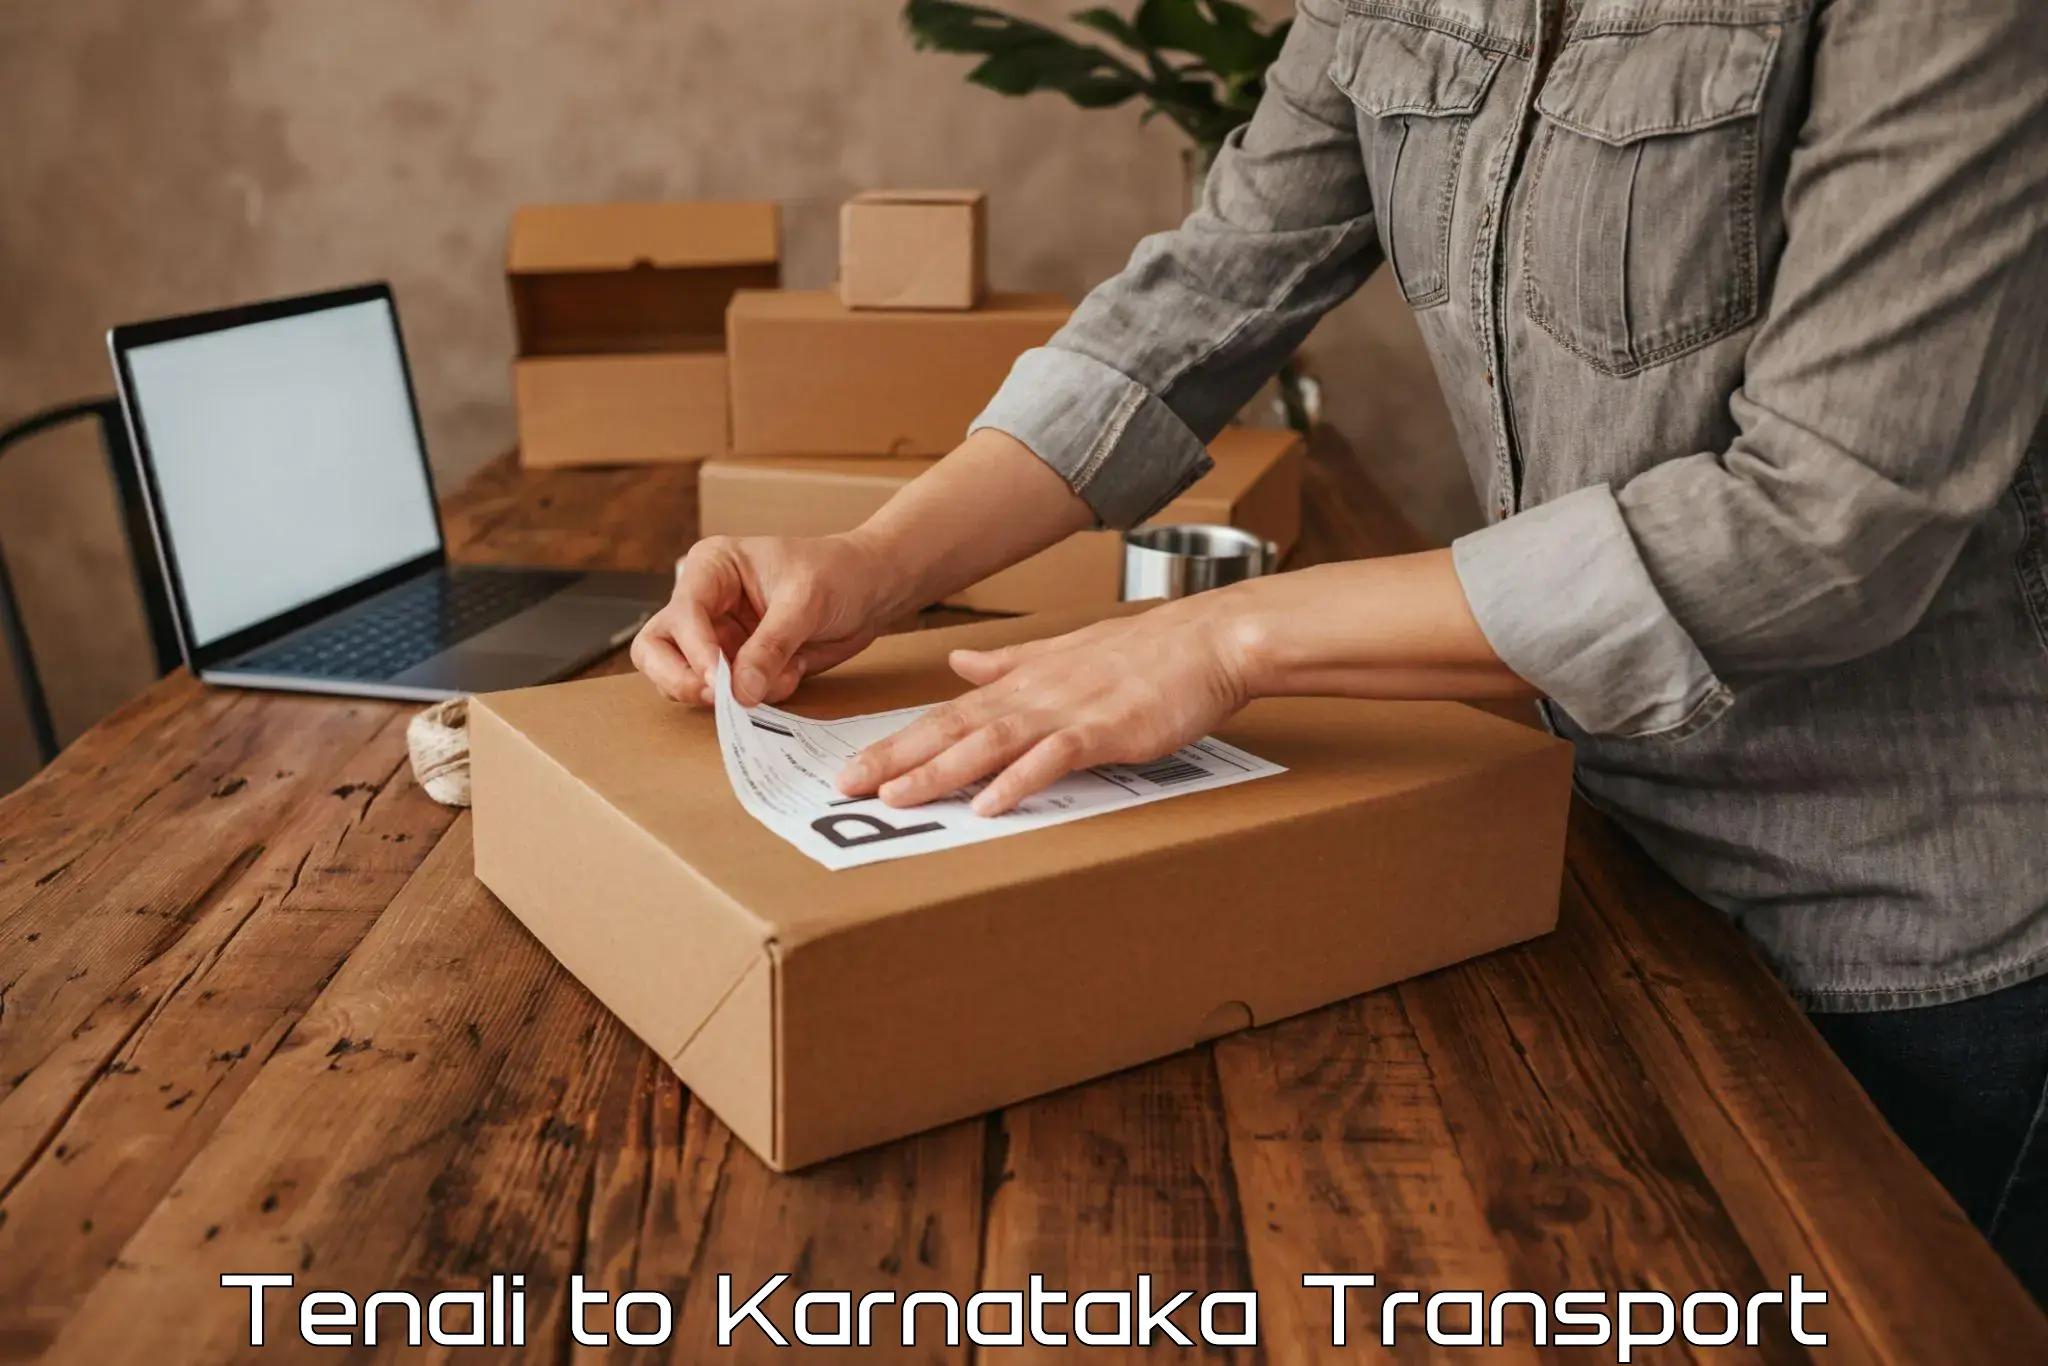 Transport bike from one state to another in Tenali to Karnataka